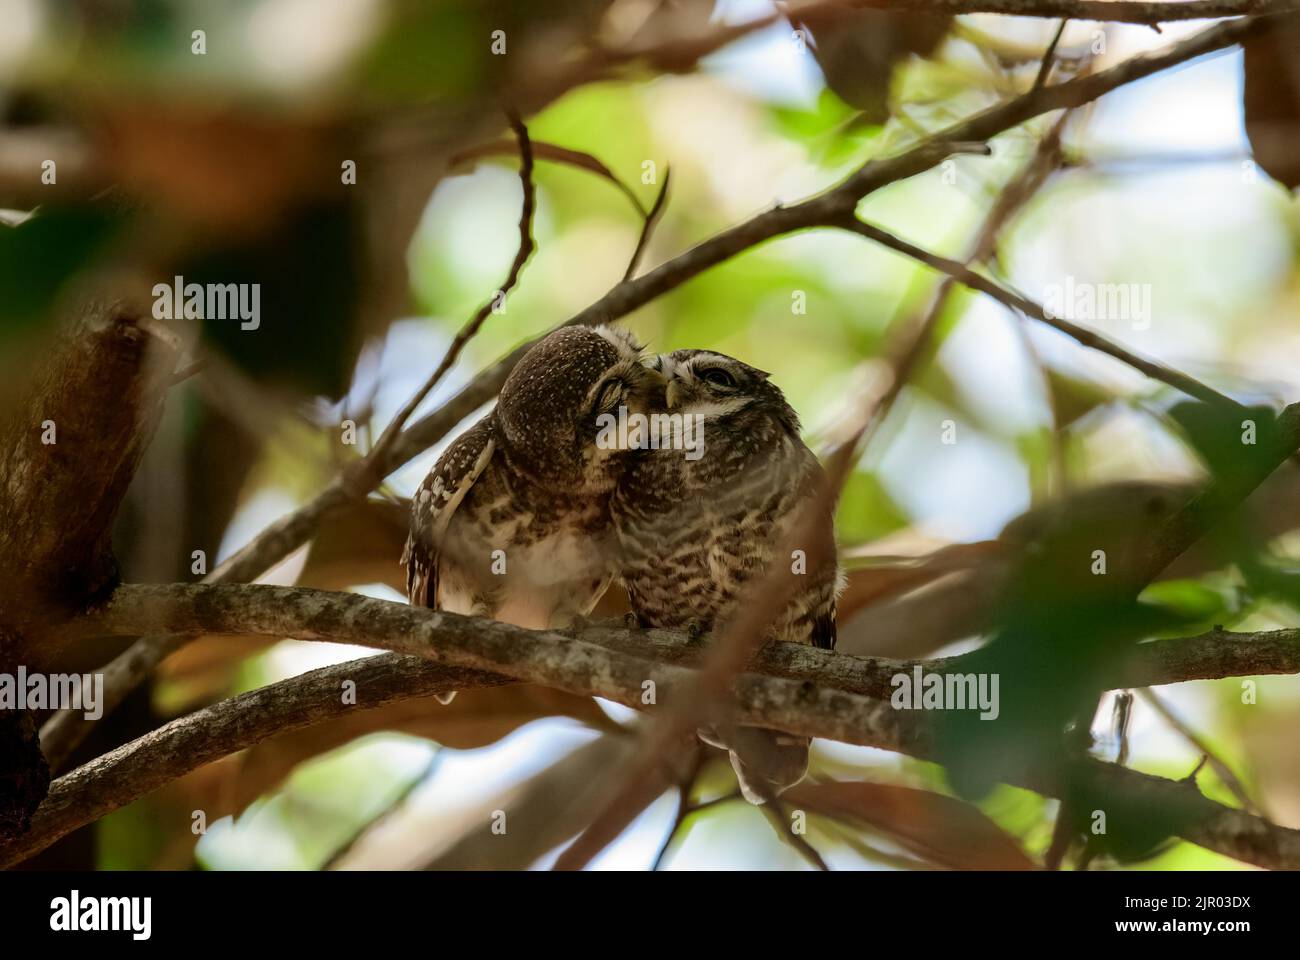 Spotted owlet is a species of small owl found commonly in India. These birds are found in open habitats and forests. They also live in human habitats Stock Photo